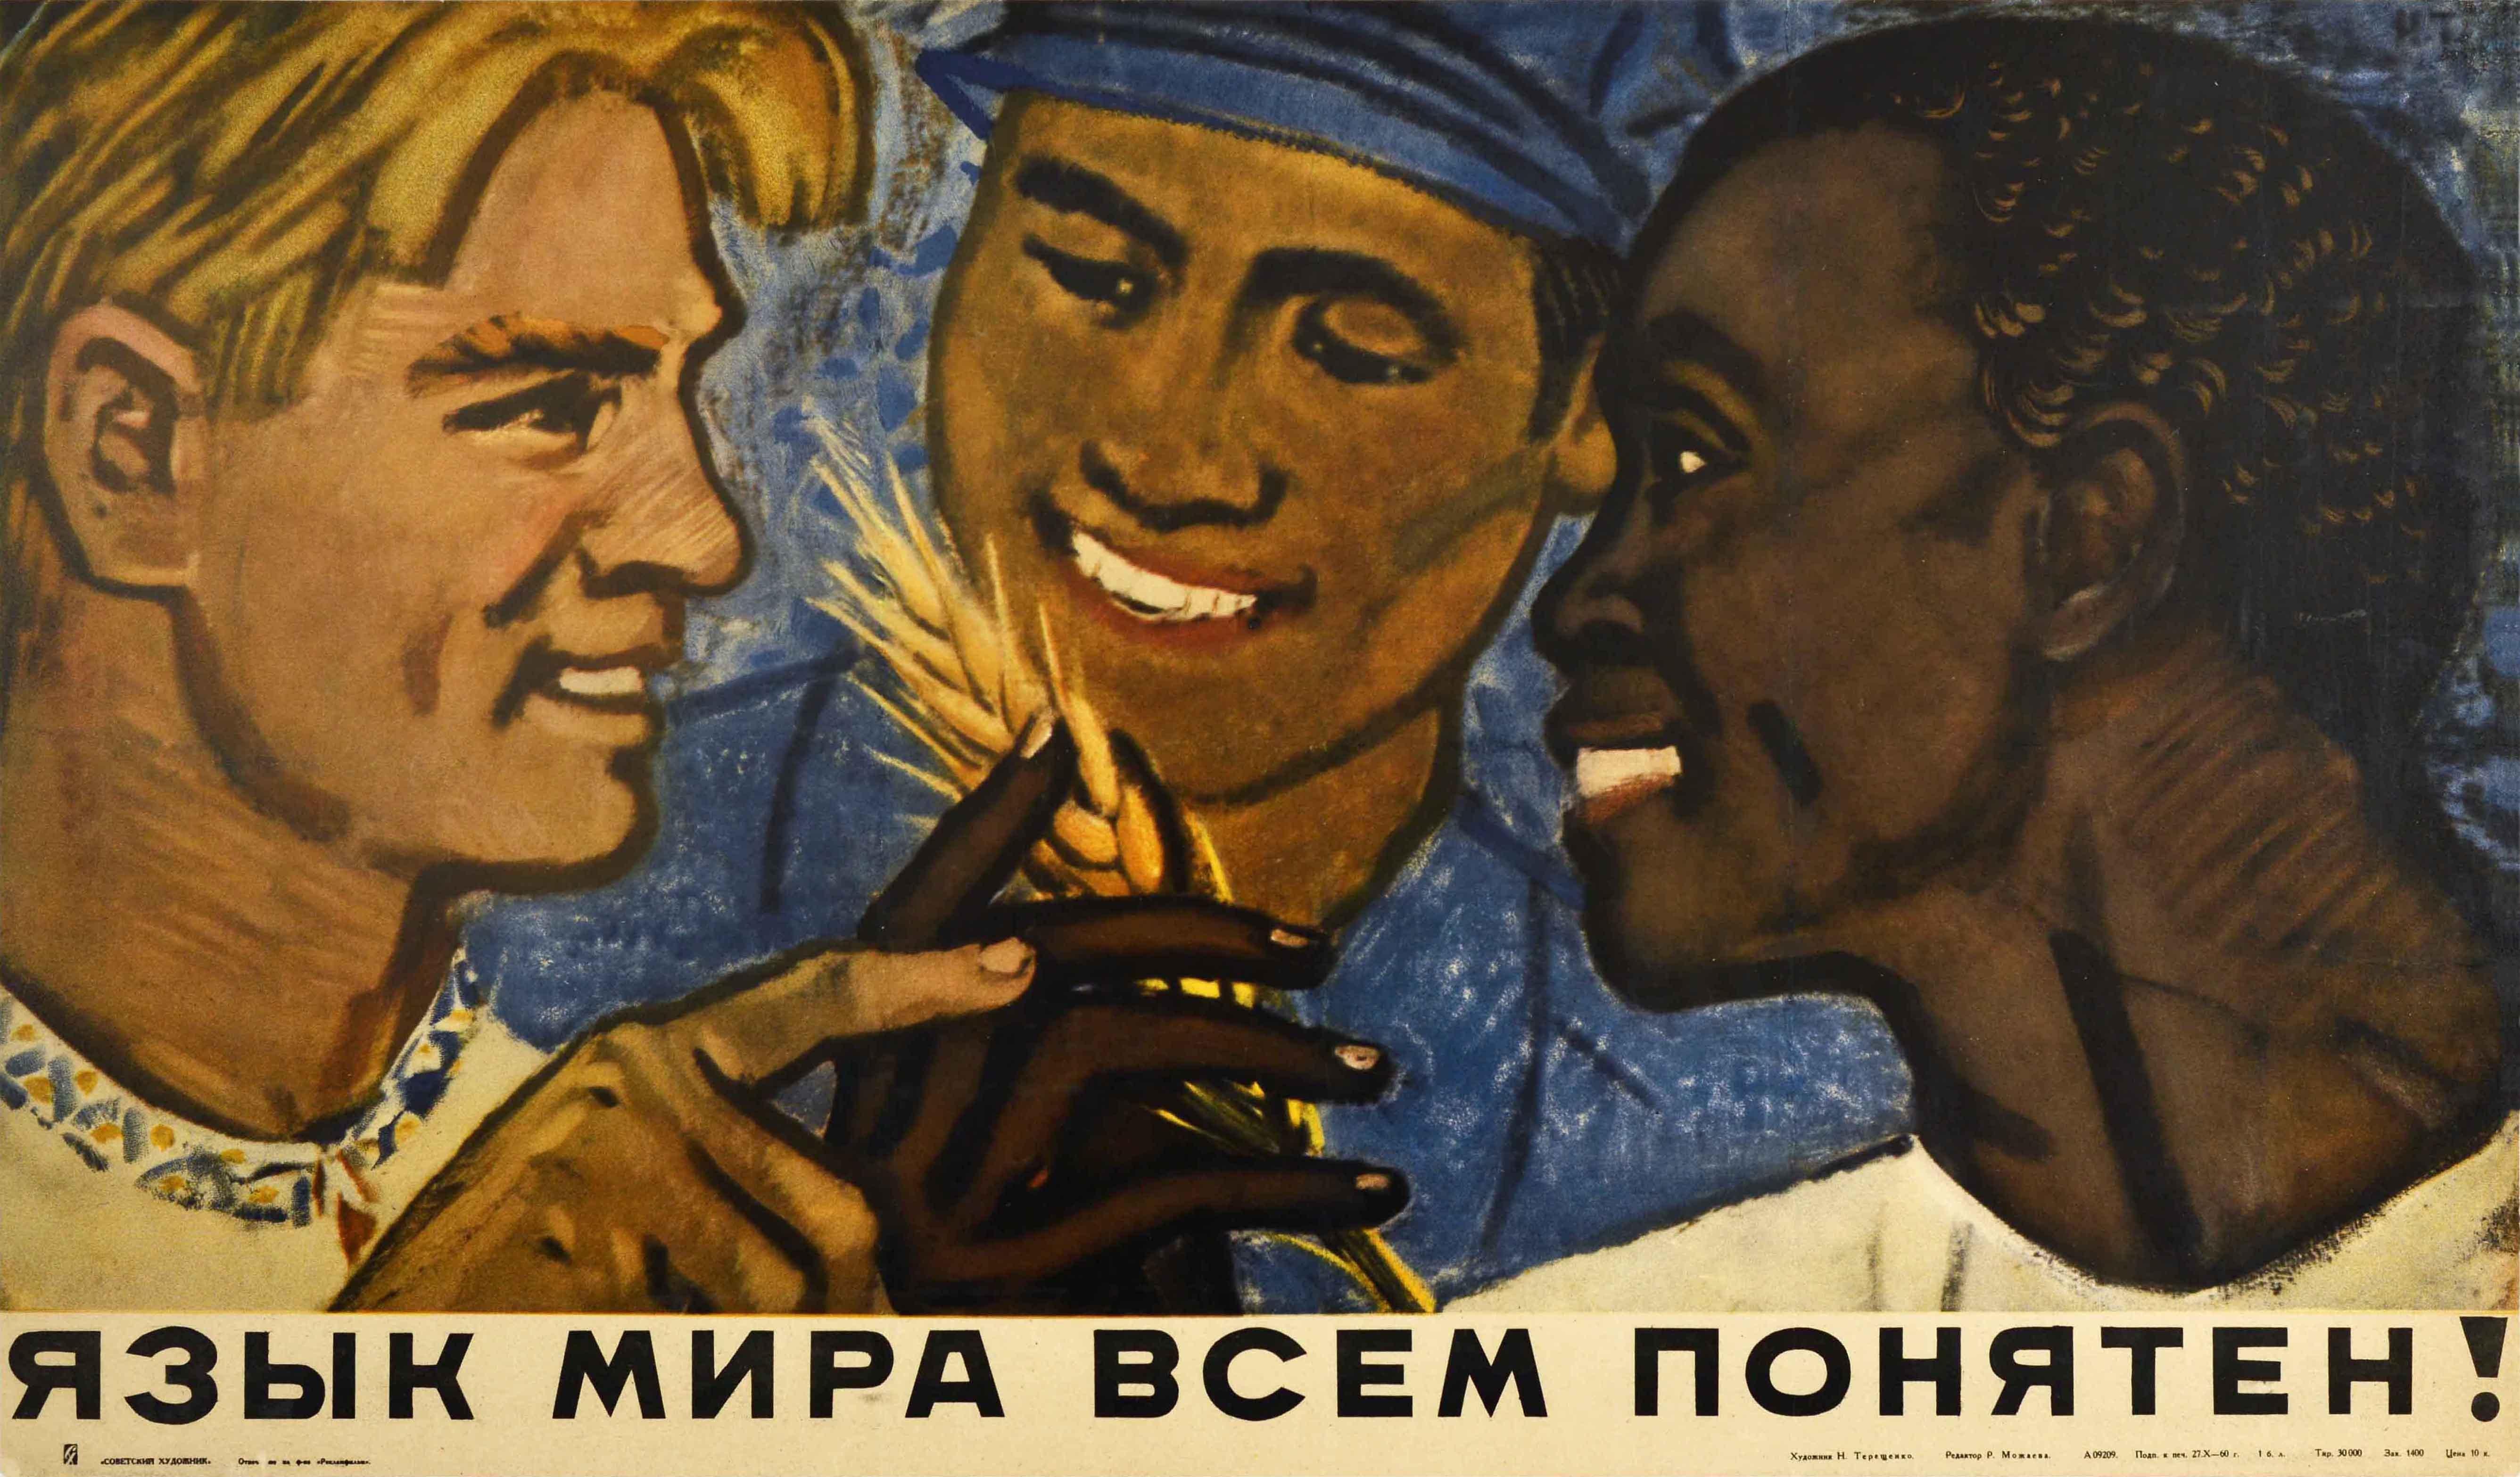 Original vintage Soviet propaganda poster - The language of Peace is understood by all / ???? ???? ???? ??????? - featuring a great illustration by the Russian poster artist Nikolay Tereshchenko (1924-2005) depicting three smiling men from different